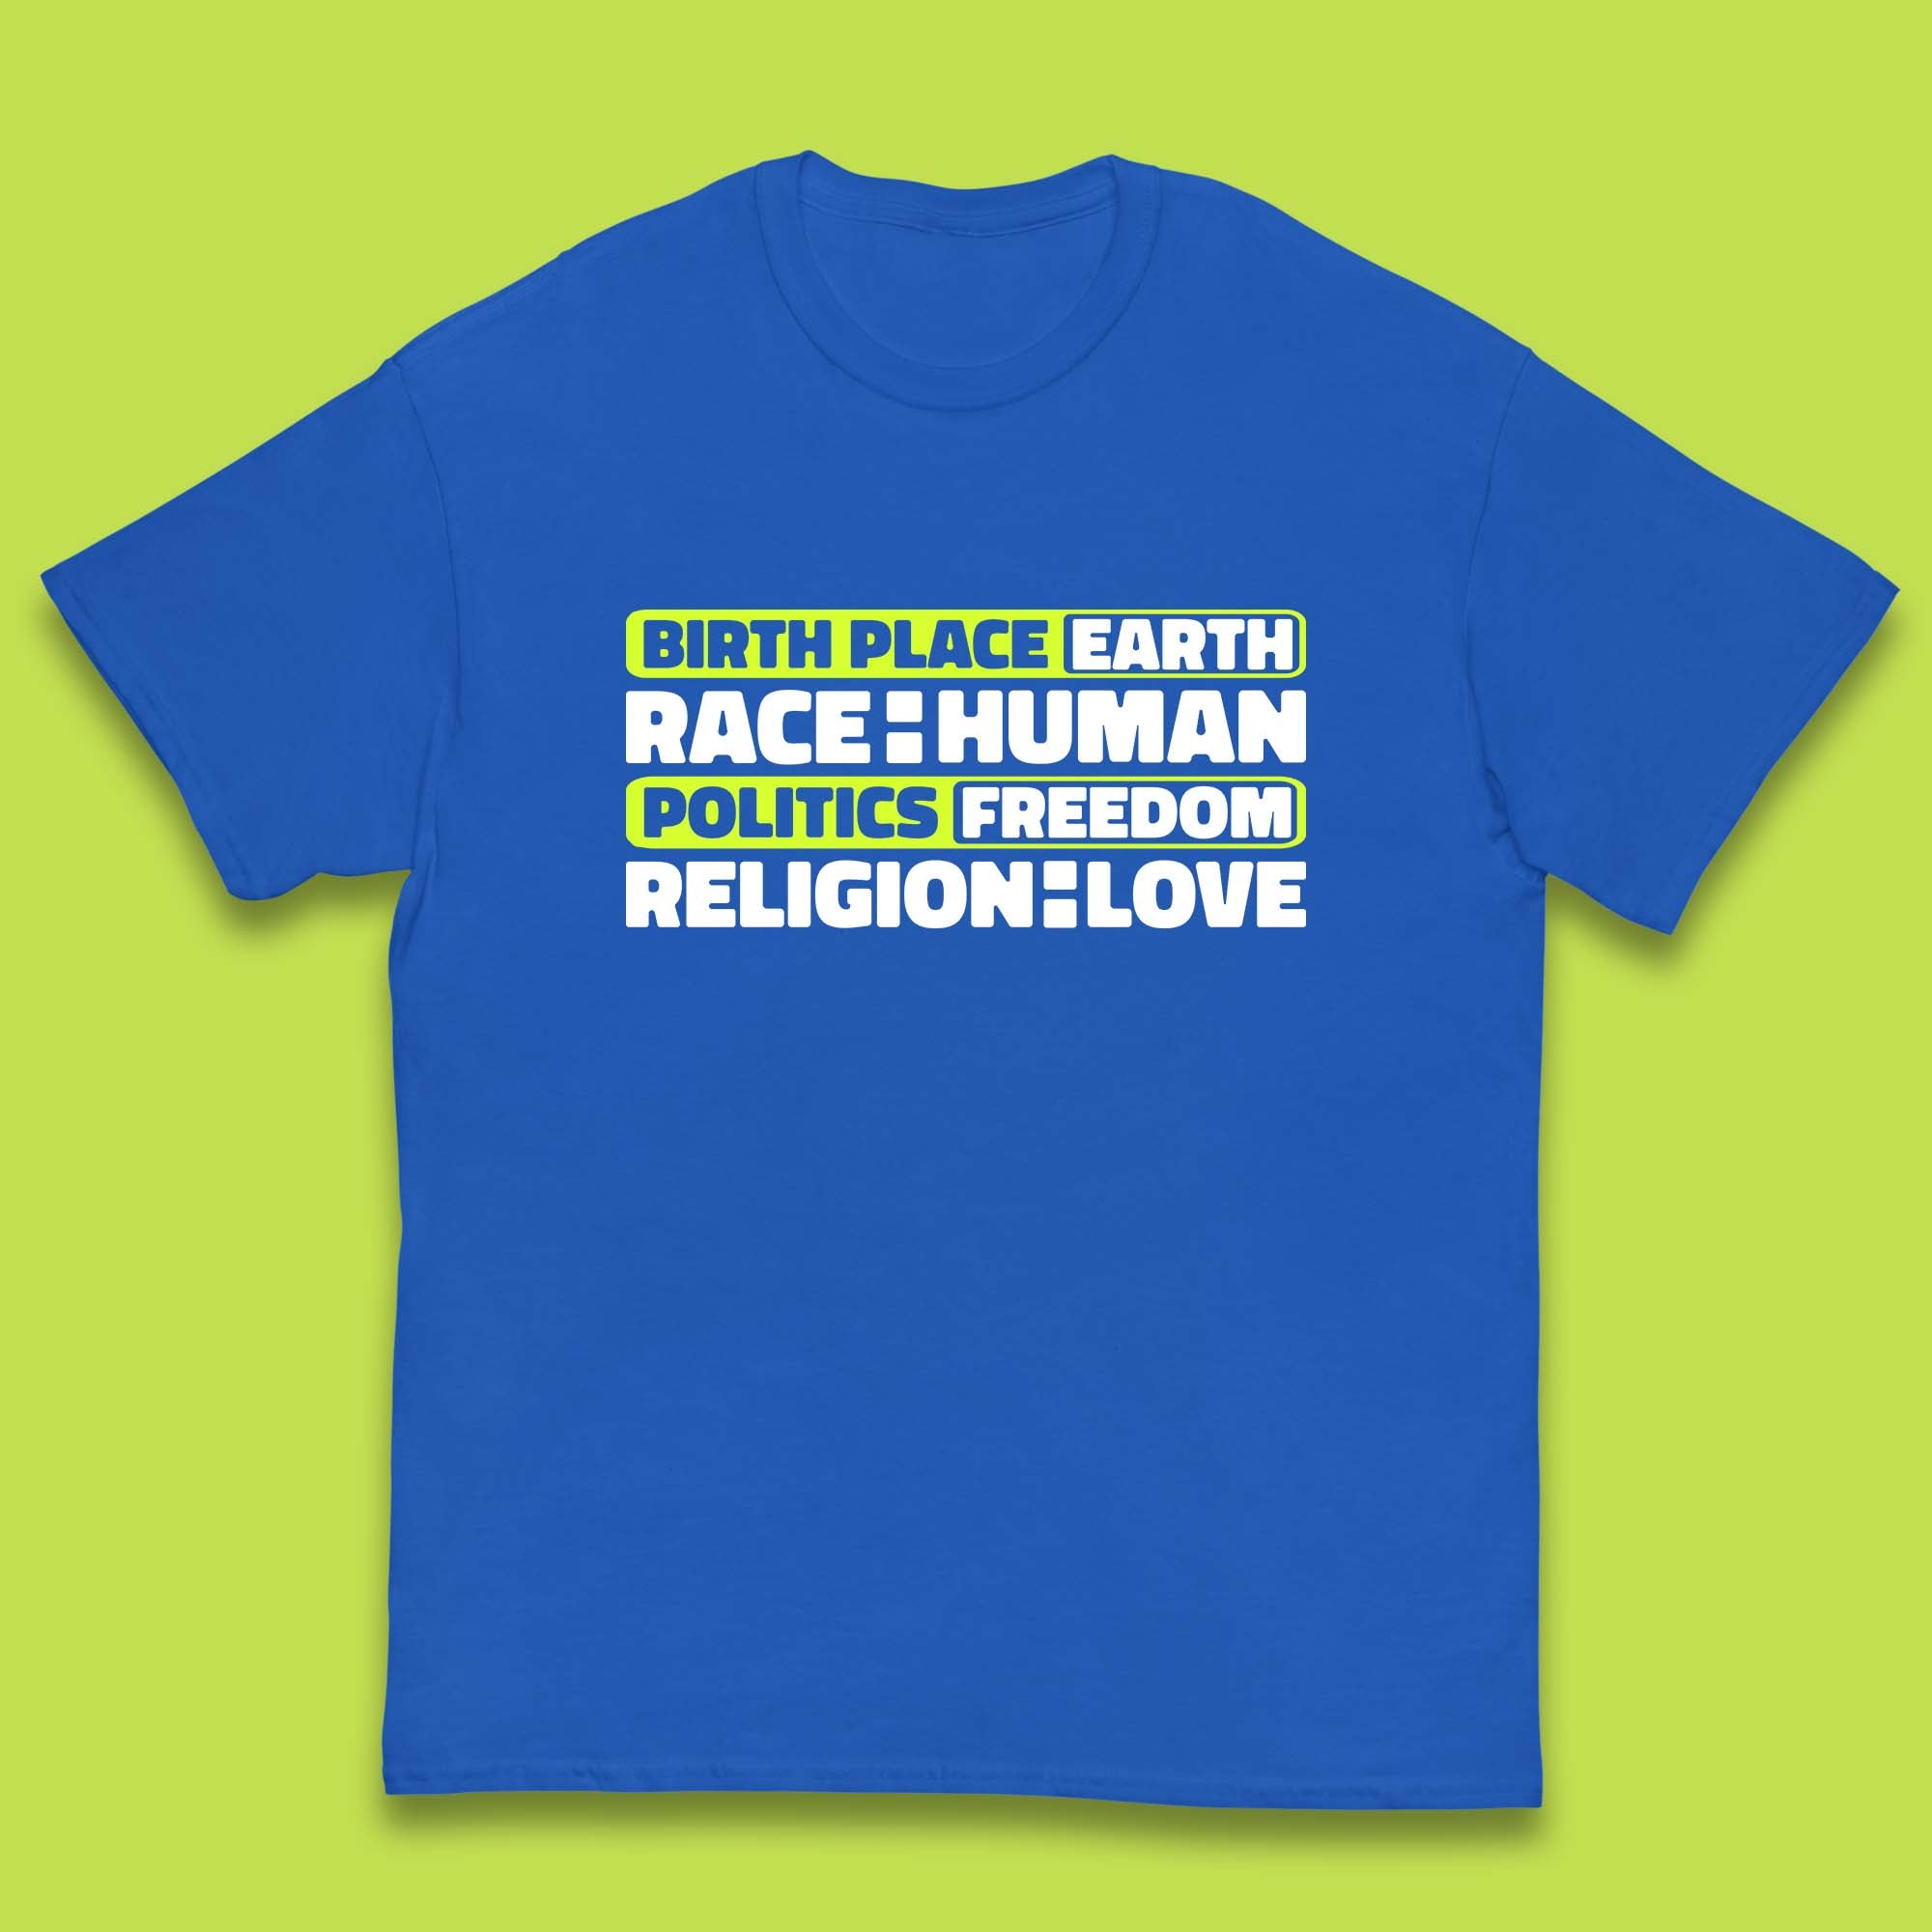 Birth Place Earth Race Human Politics Freedom Religion Love Human Rights Equality Kids T Shirt